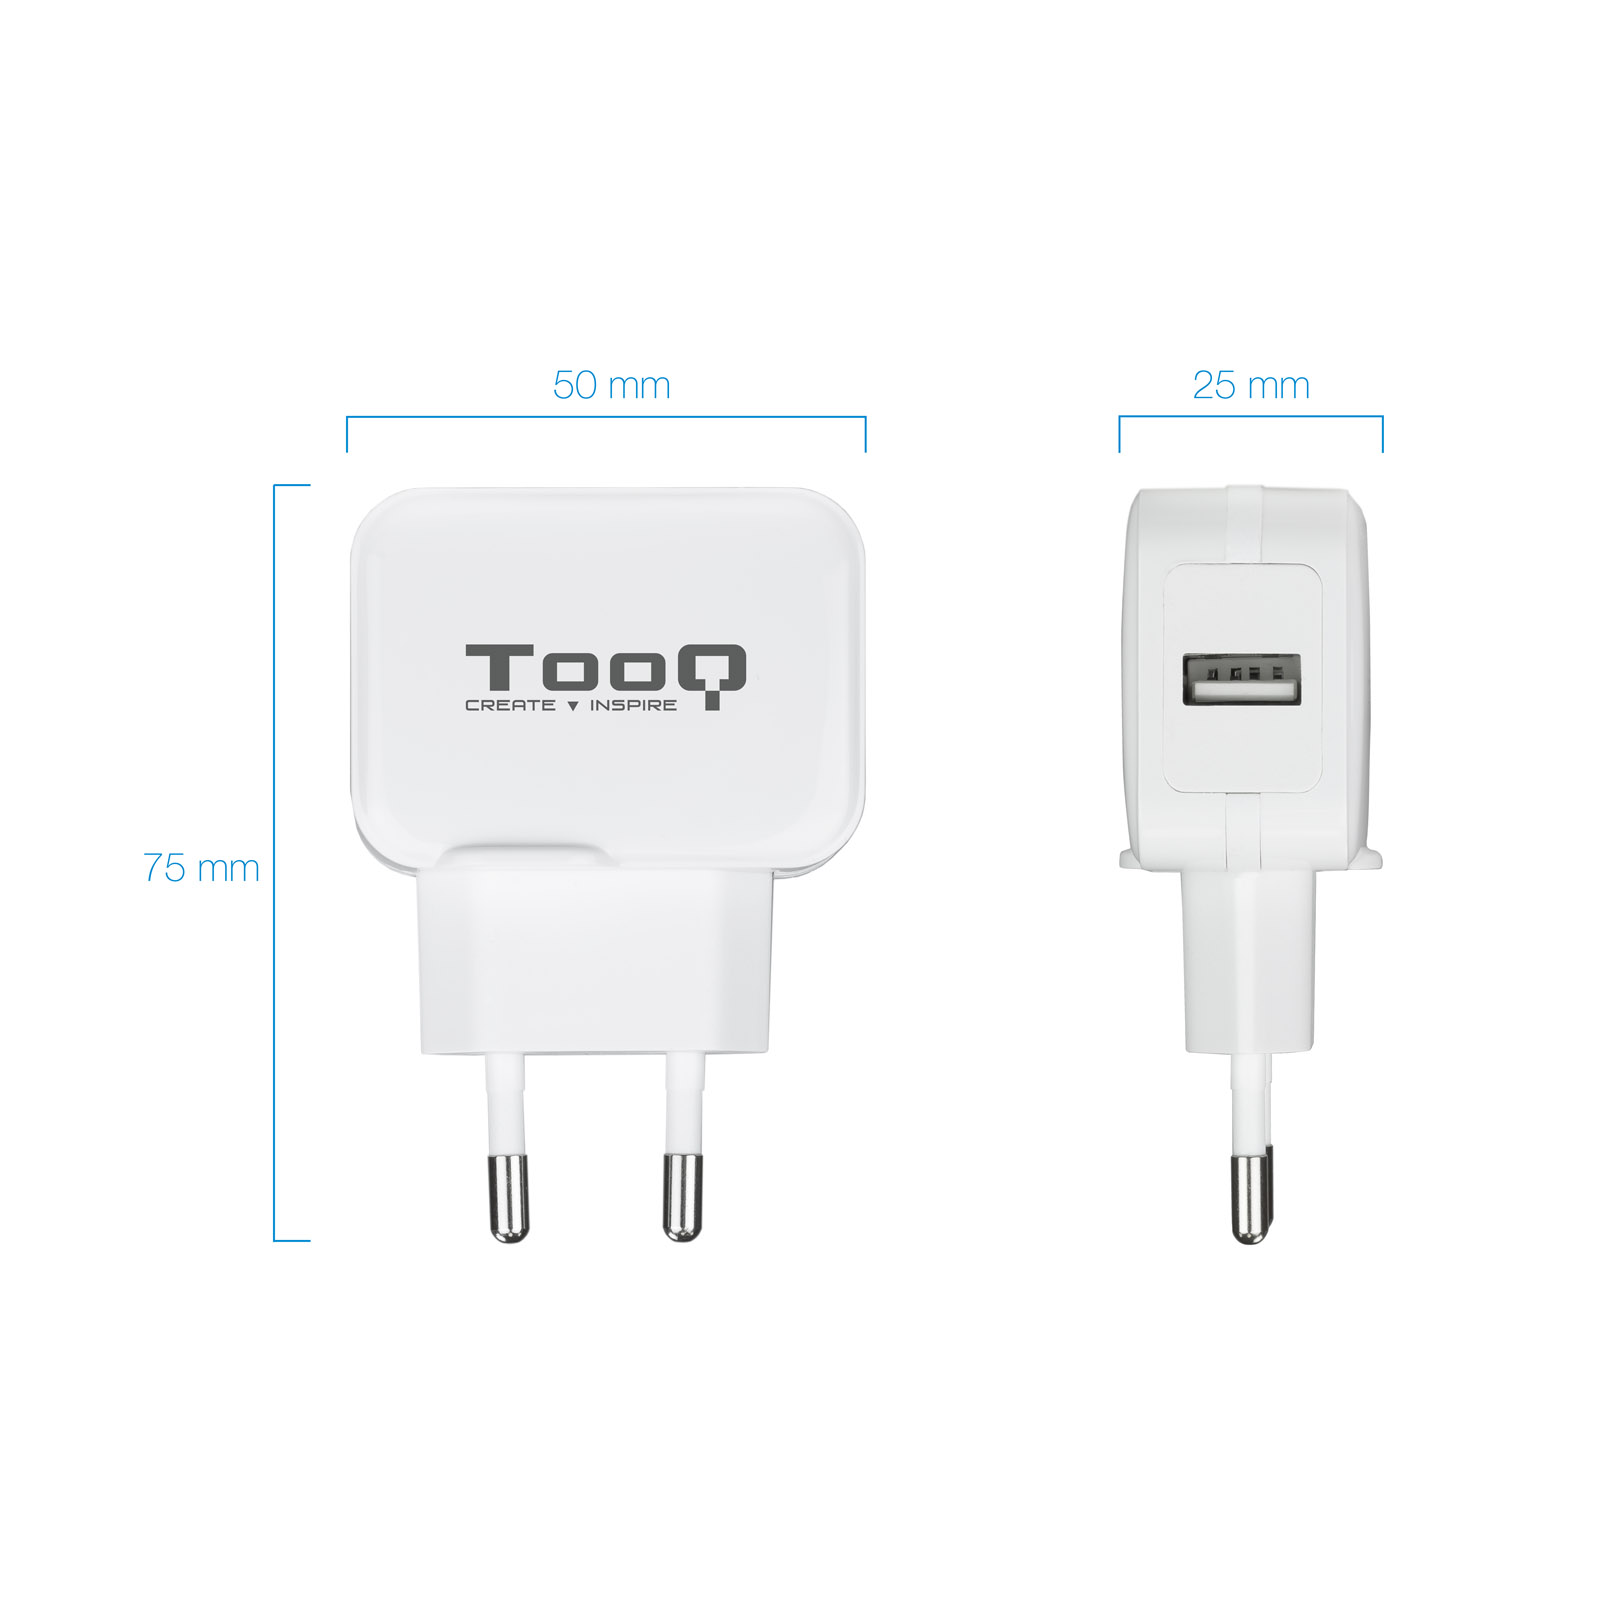 Tooq Chargeur Mural USB 5V 2.4A - 1 Port USB - Couleur Blanche